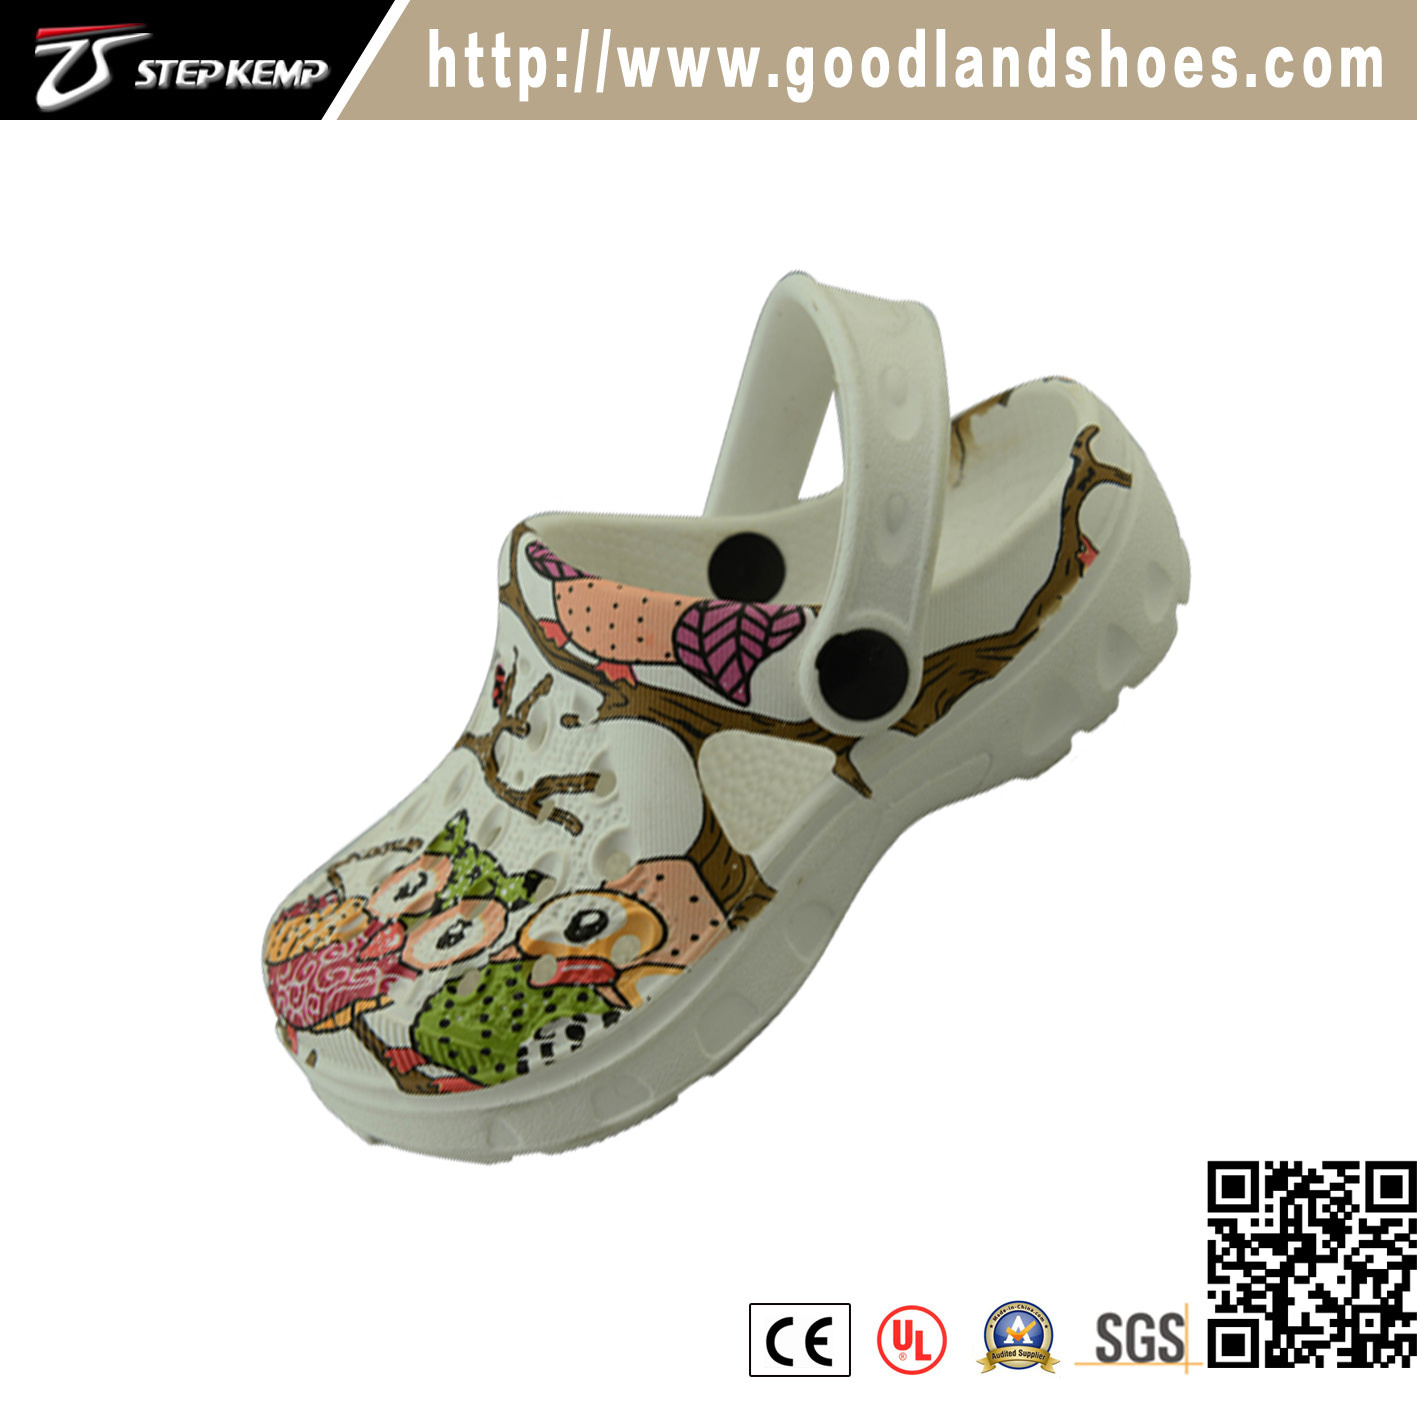 Casual Kids Garden Clog Painting Shoes for Children 20288c-2